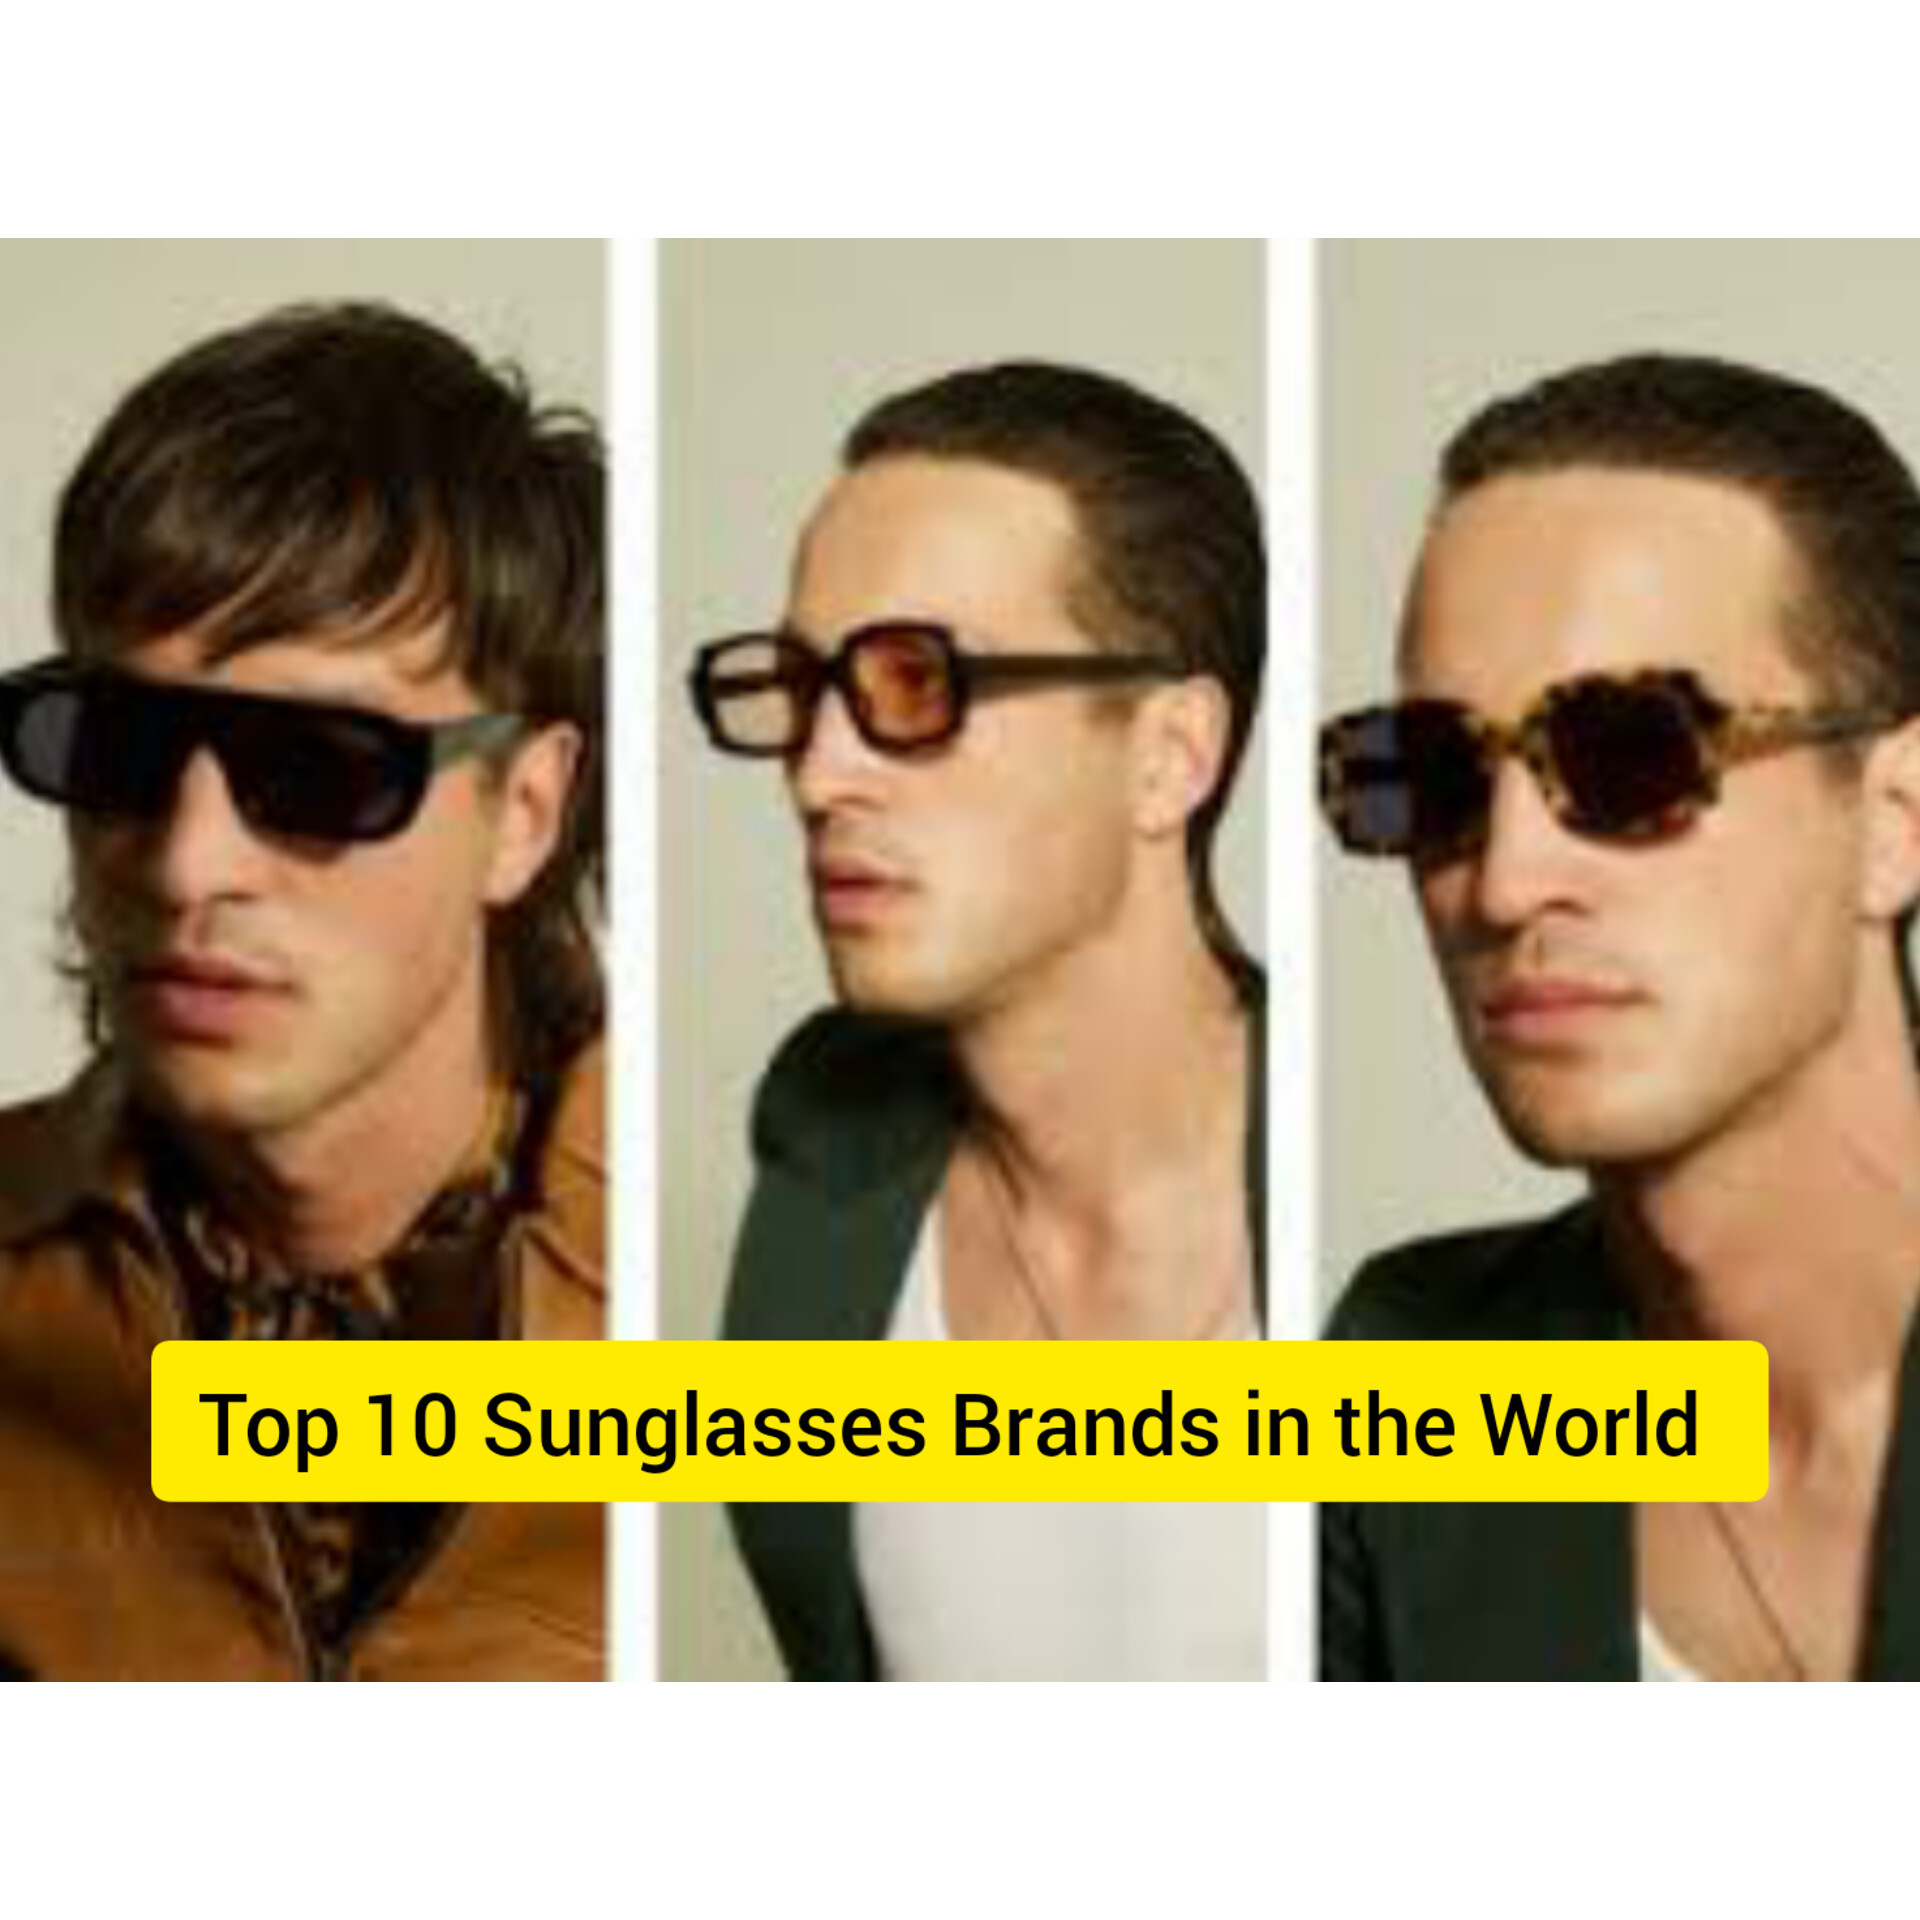 TOP 10 Famous SUNGLASSES BRANDS IN THE WORLD